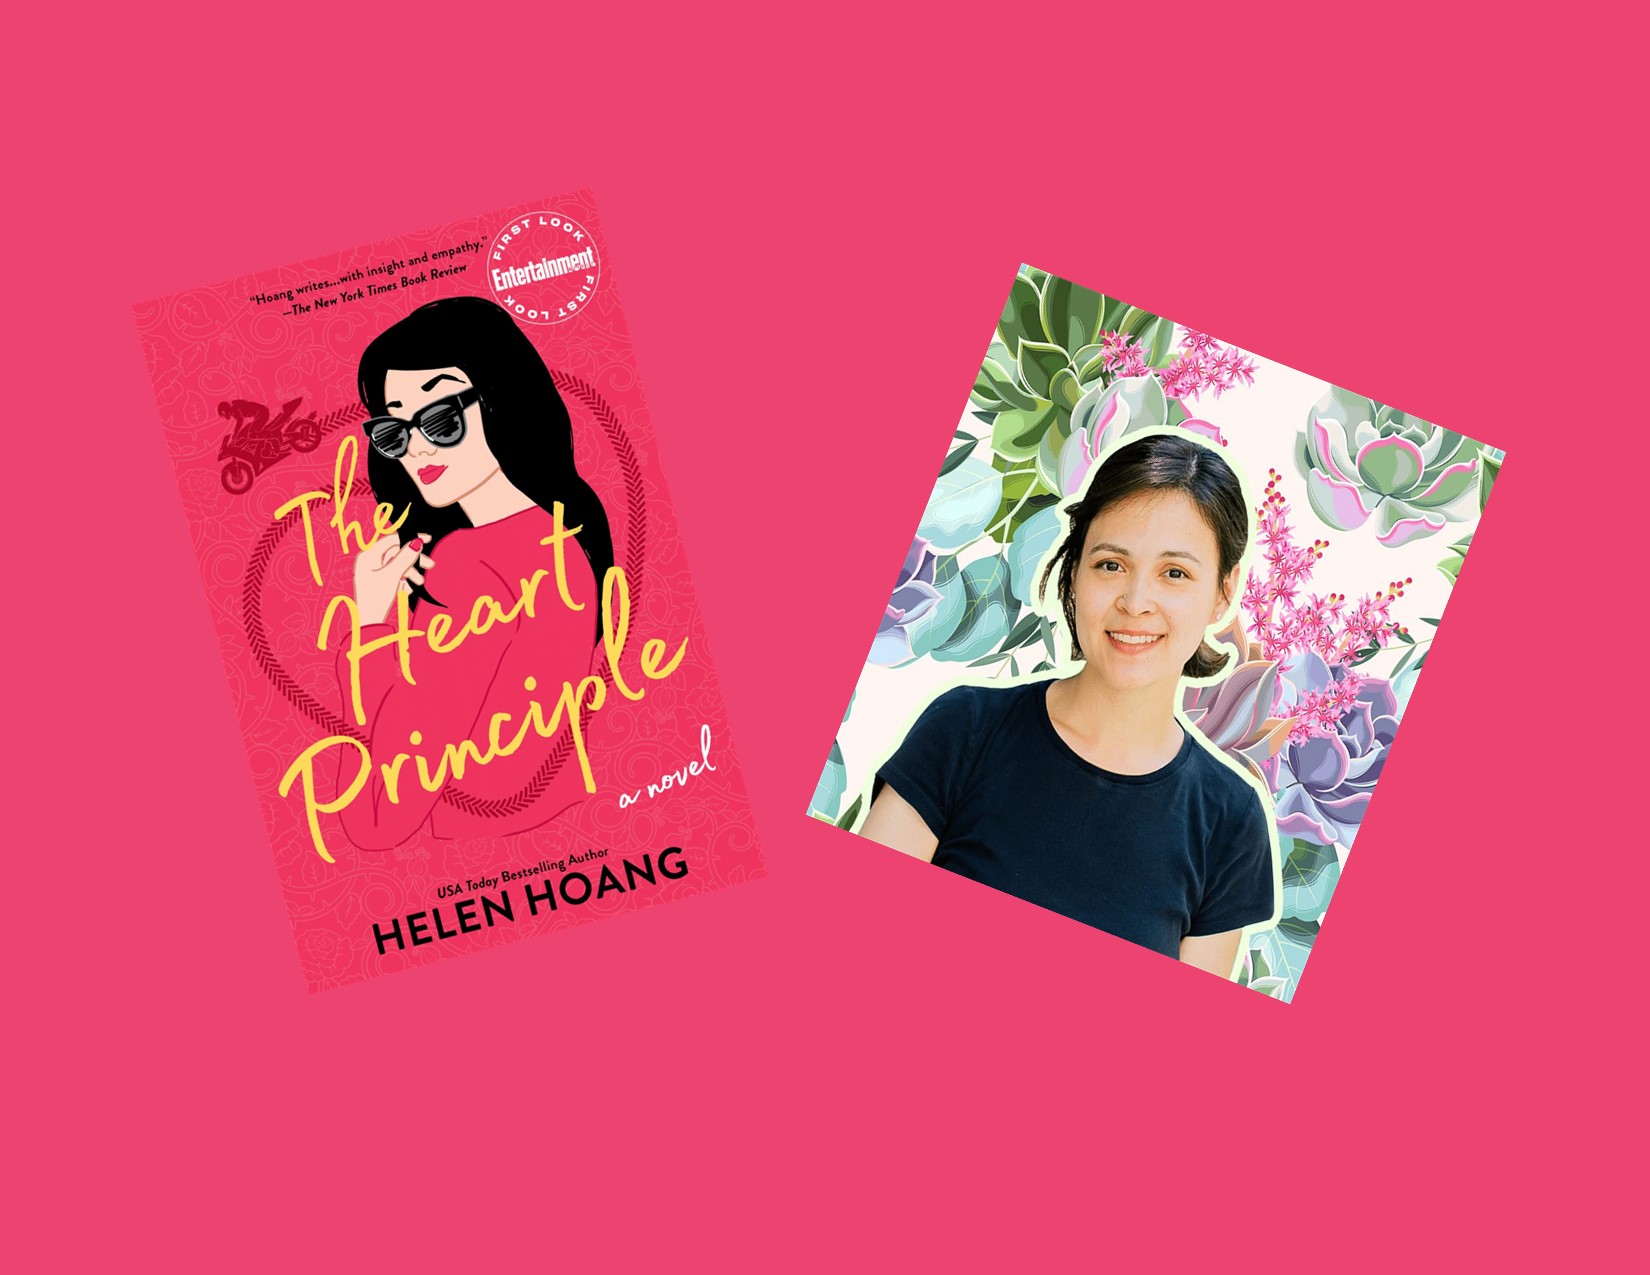 Banner has a shocking pink background with a cover of the book and a photo of author, Helen Hoang.  Helen is photographed from the chest up and is wearing a short sleeved black top.  Her dark hair is pulled back and she is smiling.  The background behind her is a mixture of pink, lavender, blue and green florals.